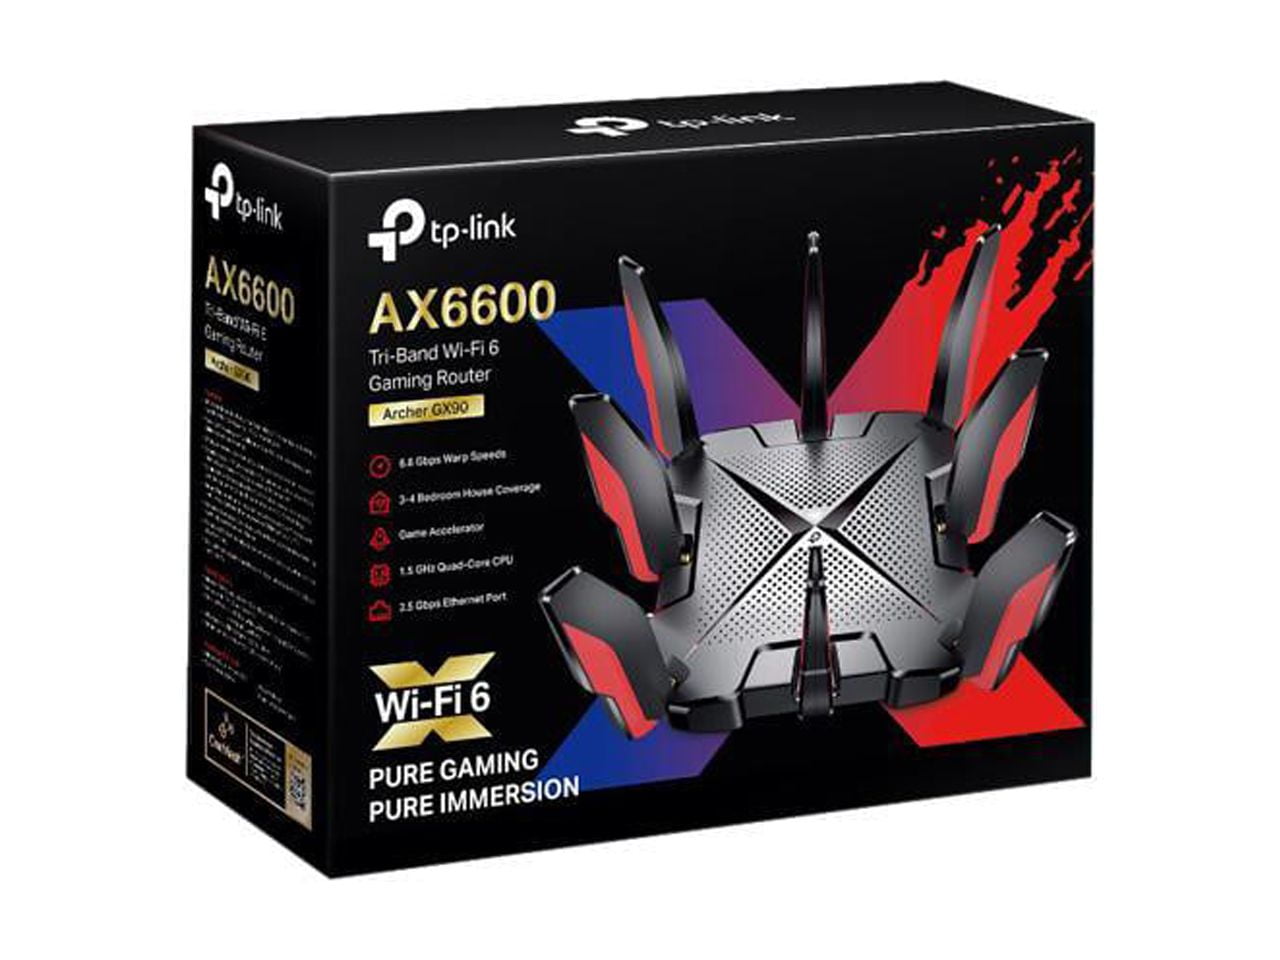 TP-Link Archer GX90 AX6600 Tri-Band Wi-Fi 6 Gaming Router 